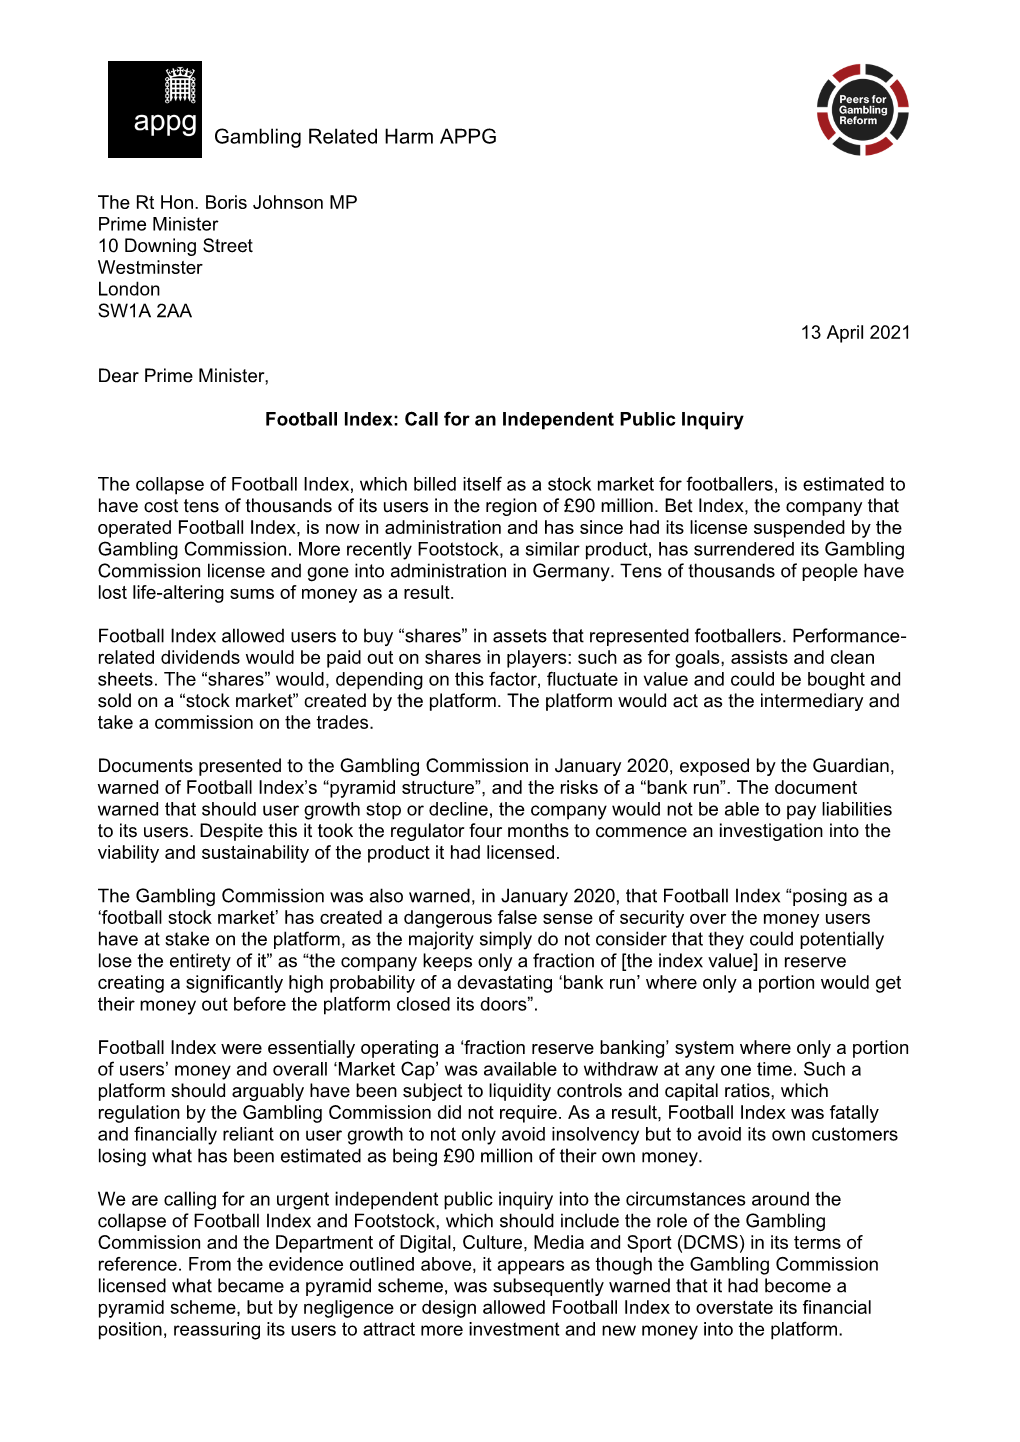 GRH APPG Letter to PM Re Football Index Public Inquiry 13.04.21